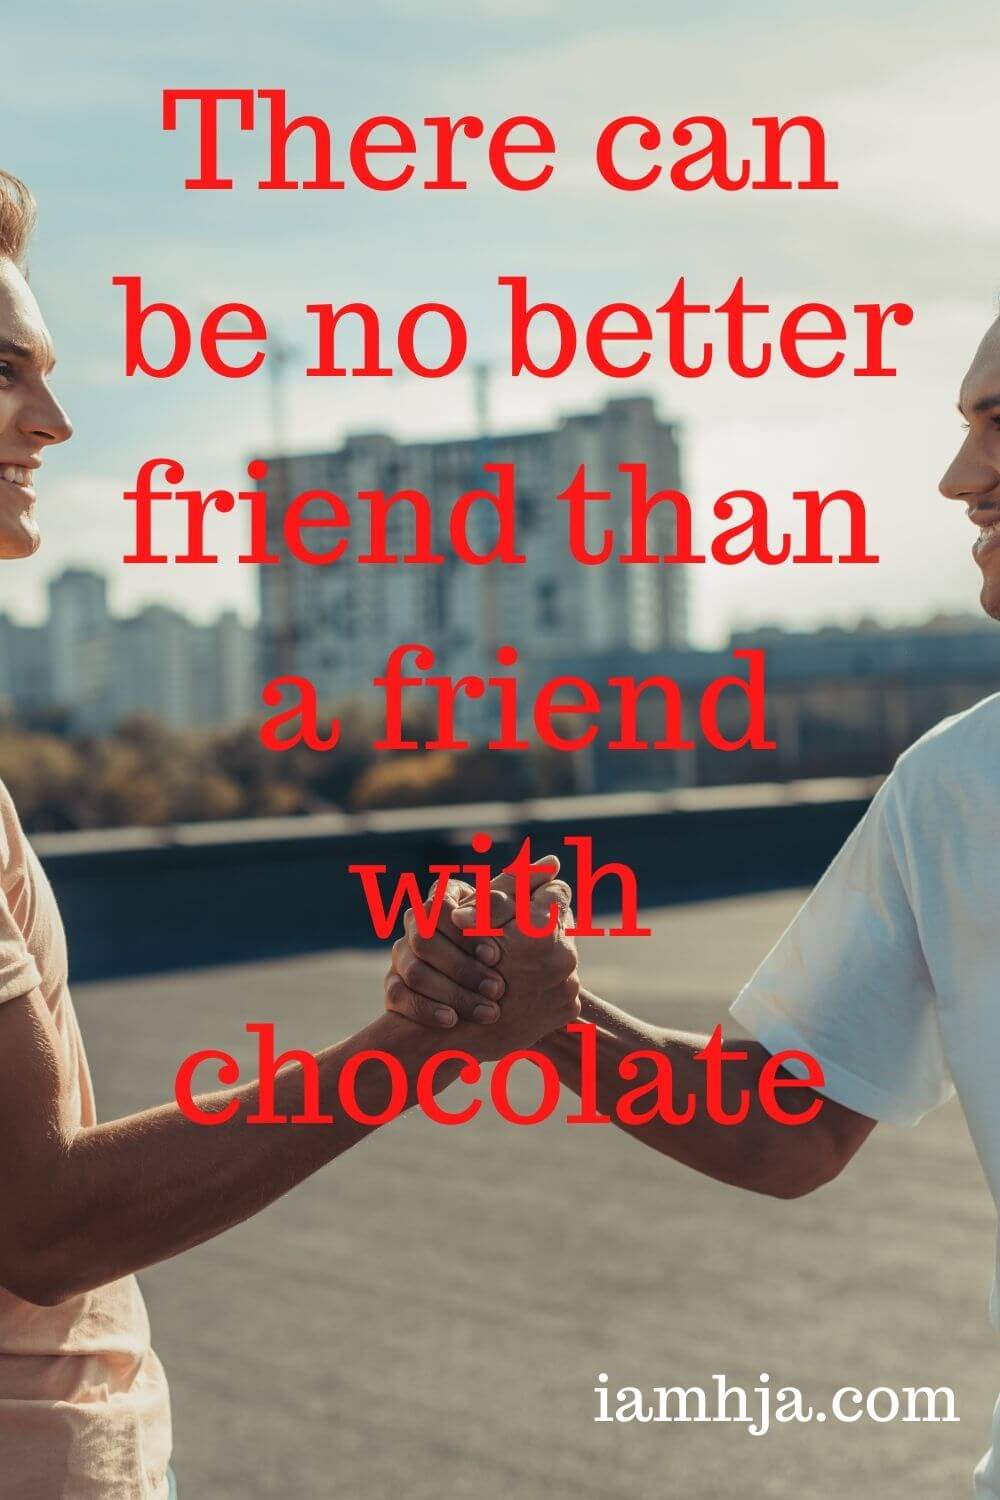 There can be no better friend than a friend with chocolate